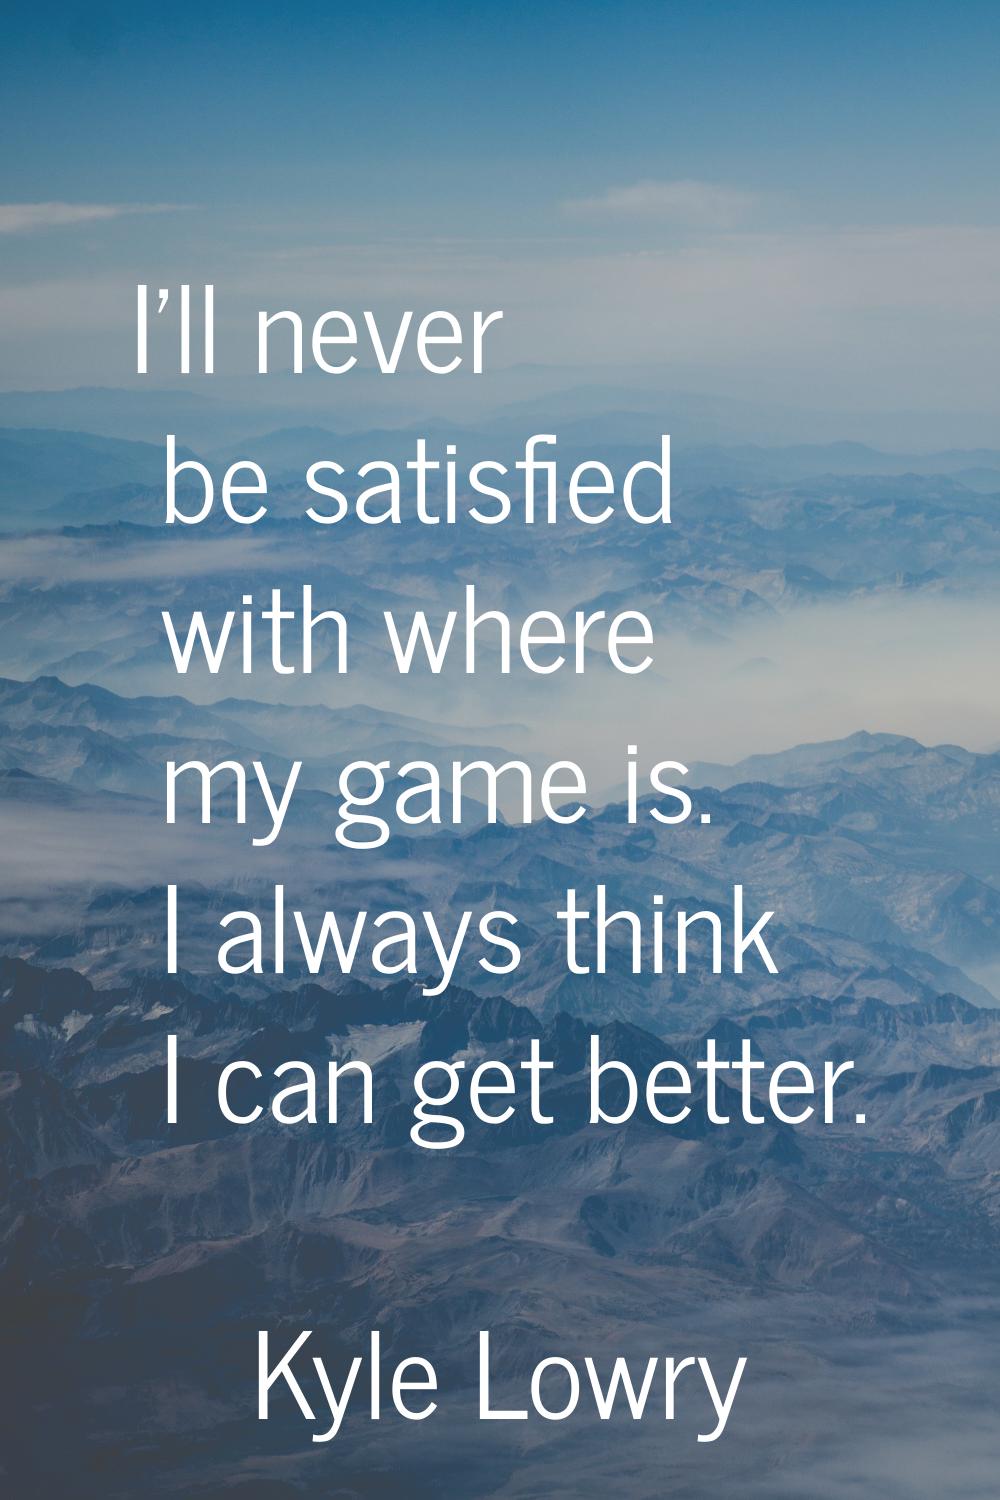 I'll never be satisfied with where my game is. I always think I can get better.